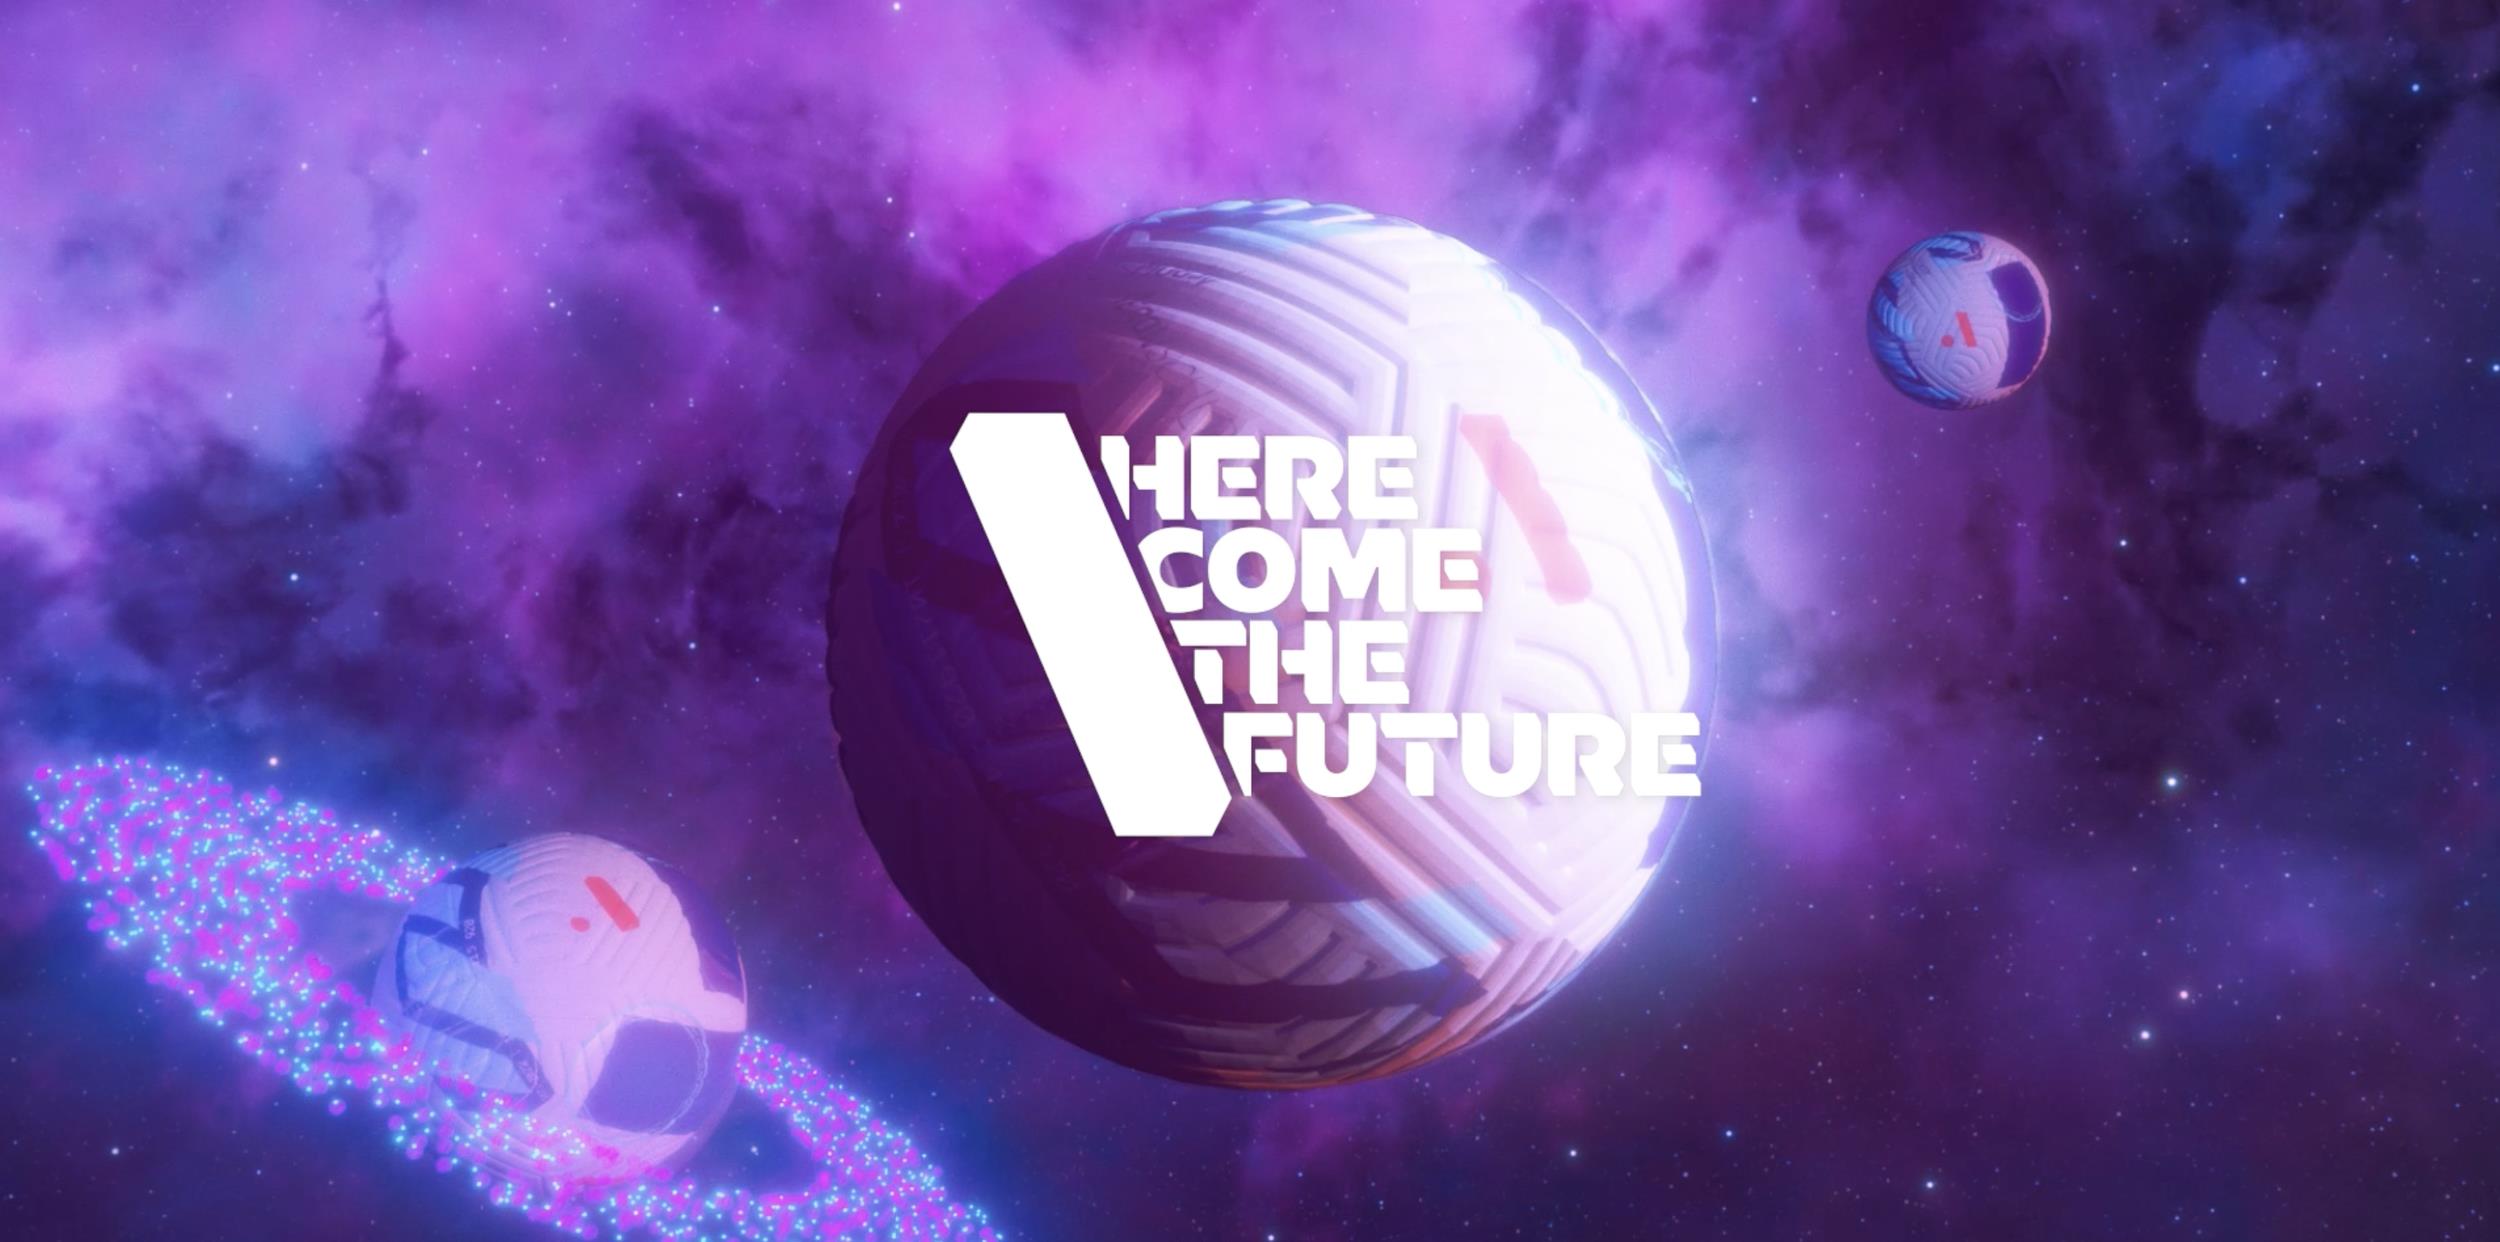 A-Leagues - Here Comes The Future 